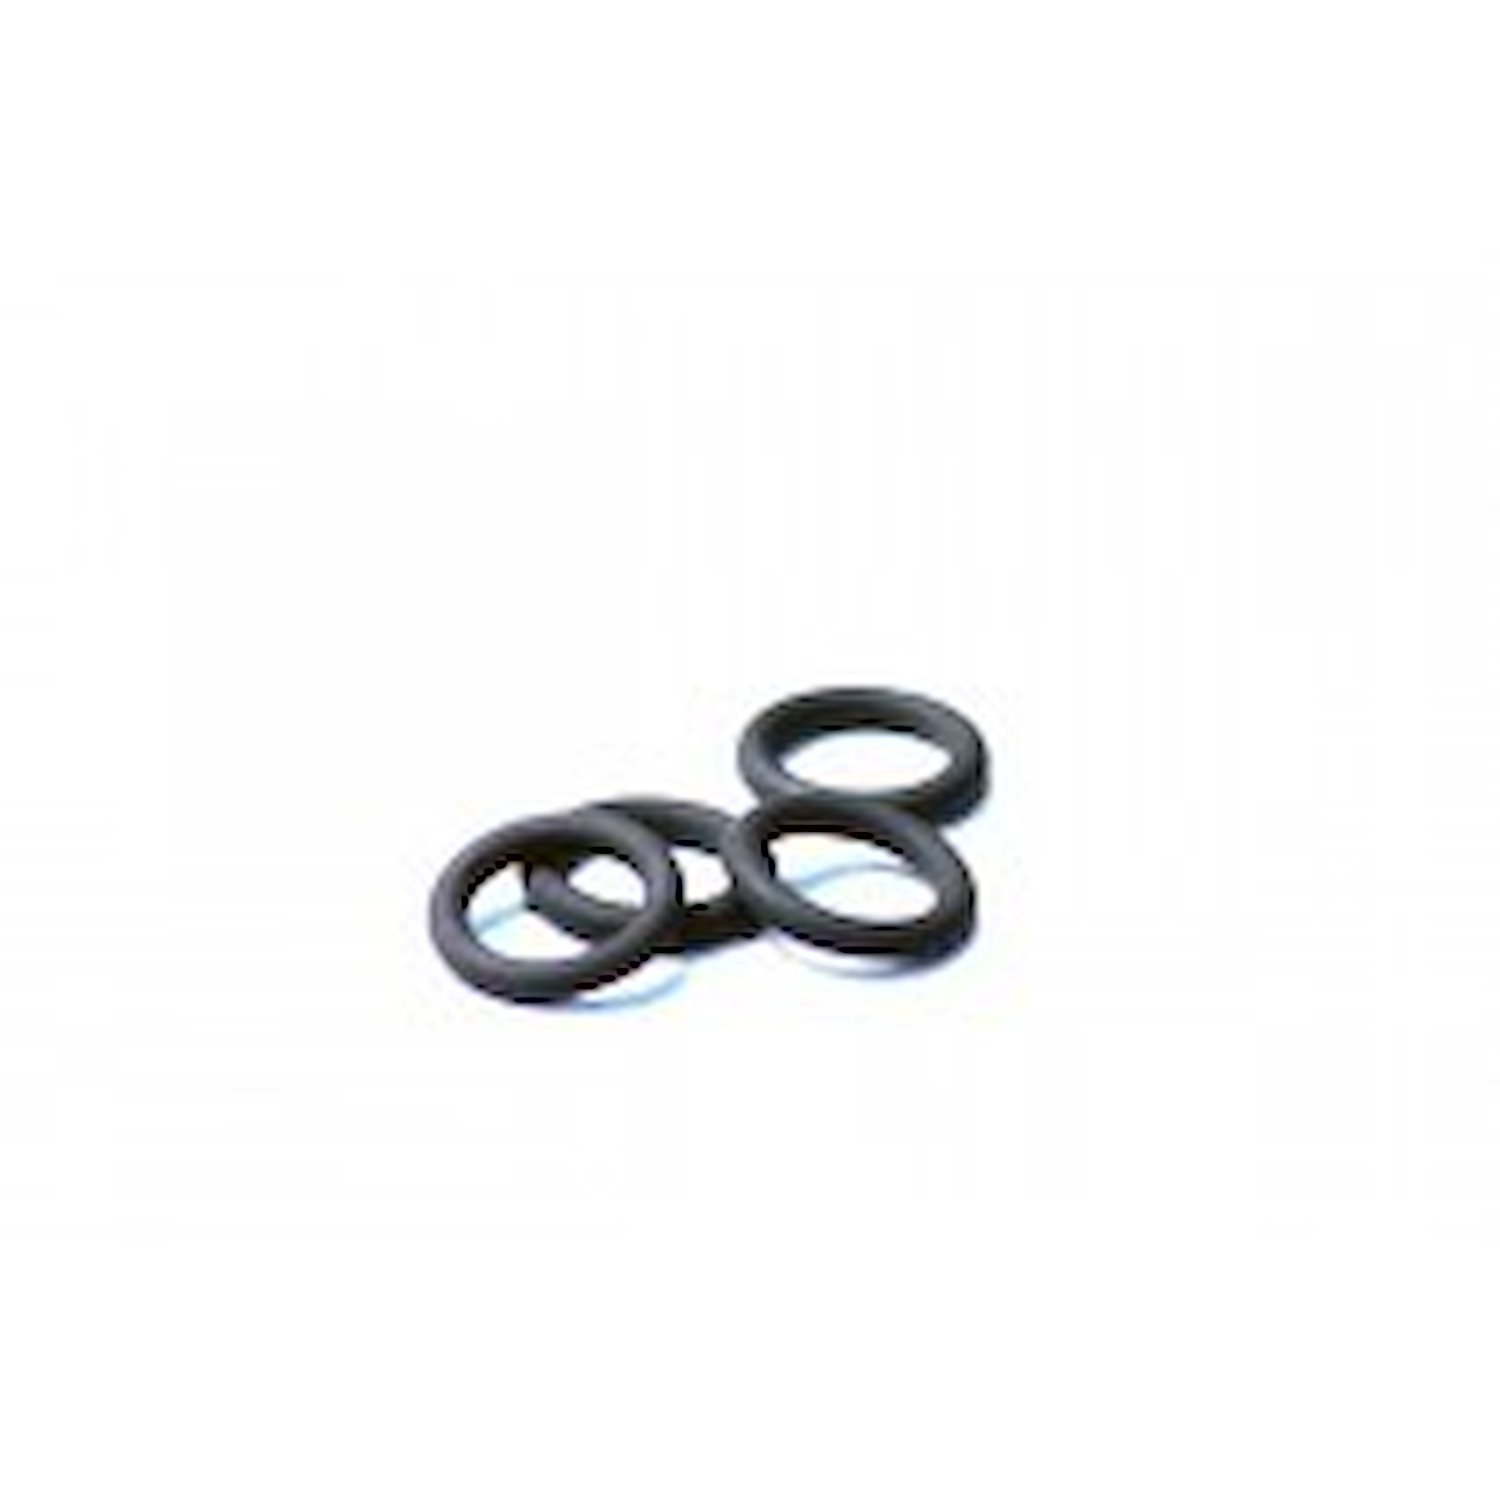 92.8 11 mm Top O-Ring for Adapter Tops